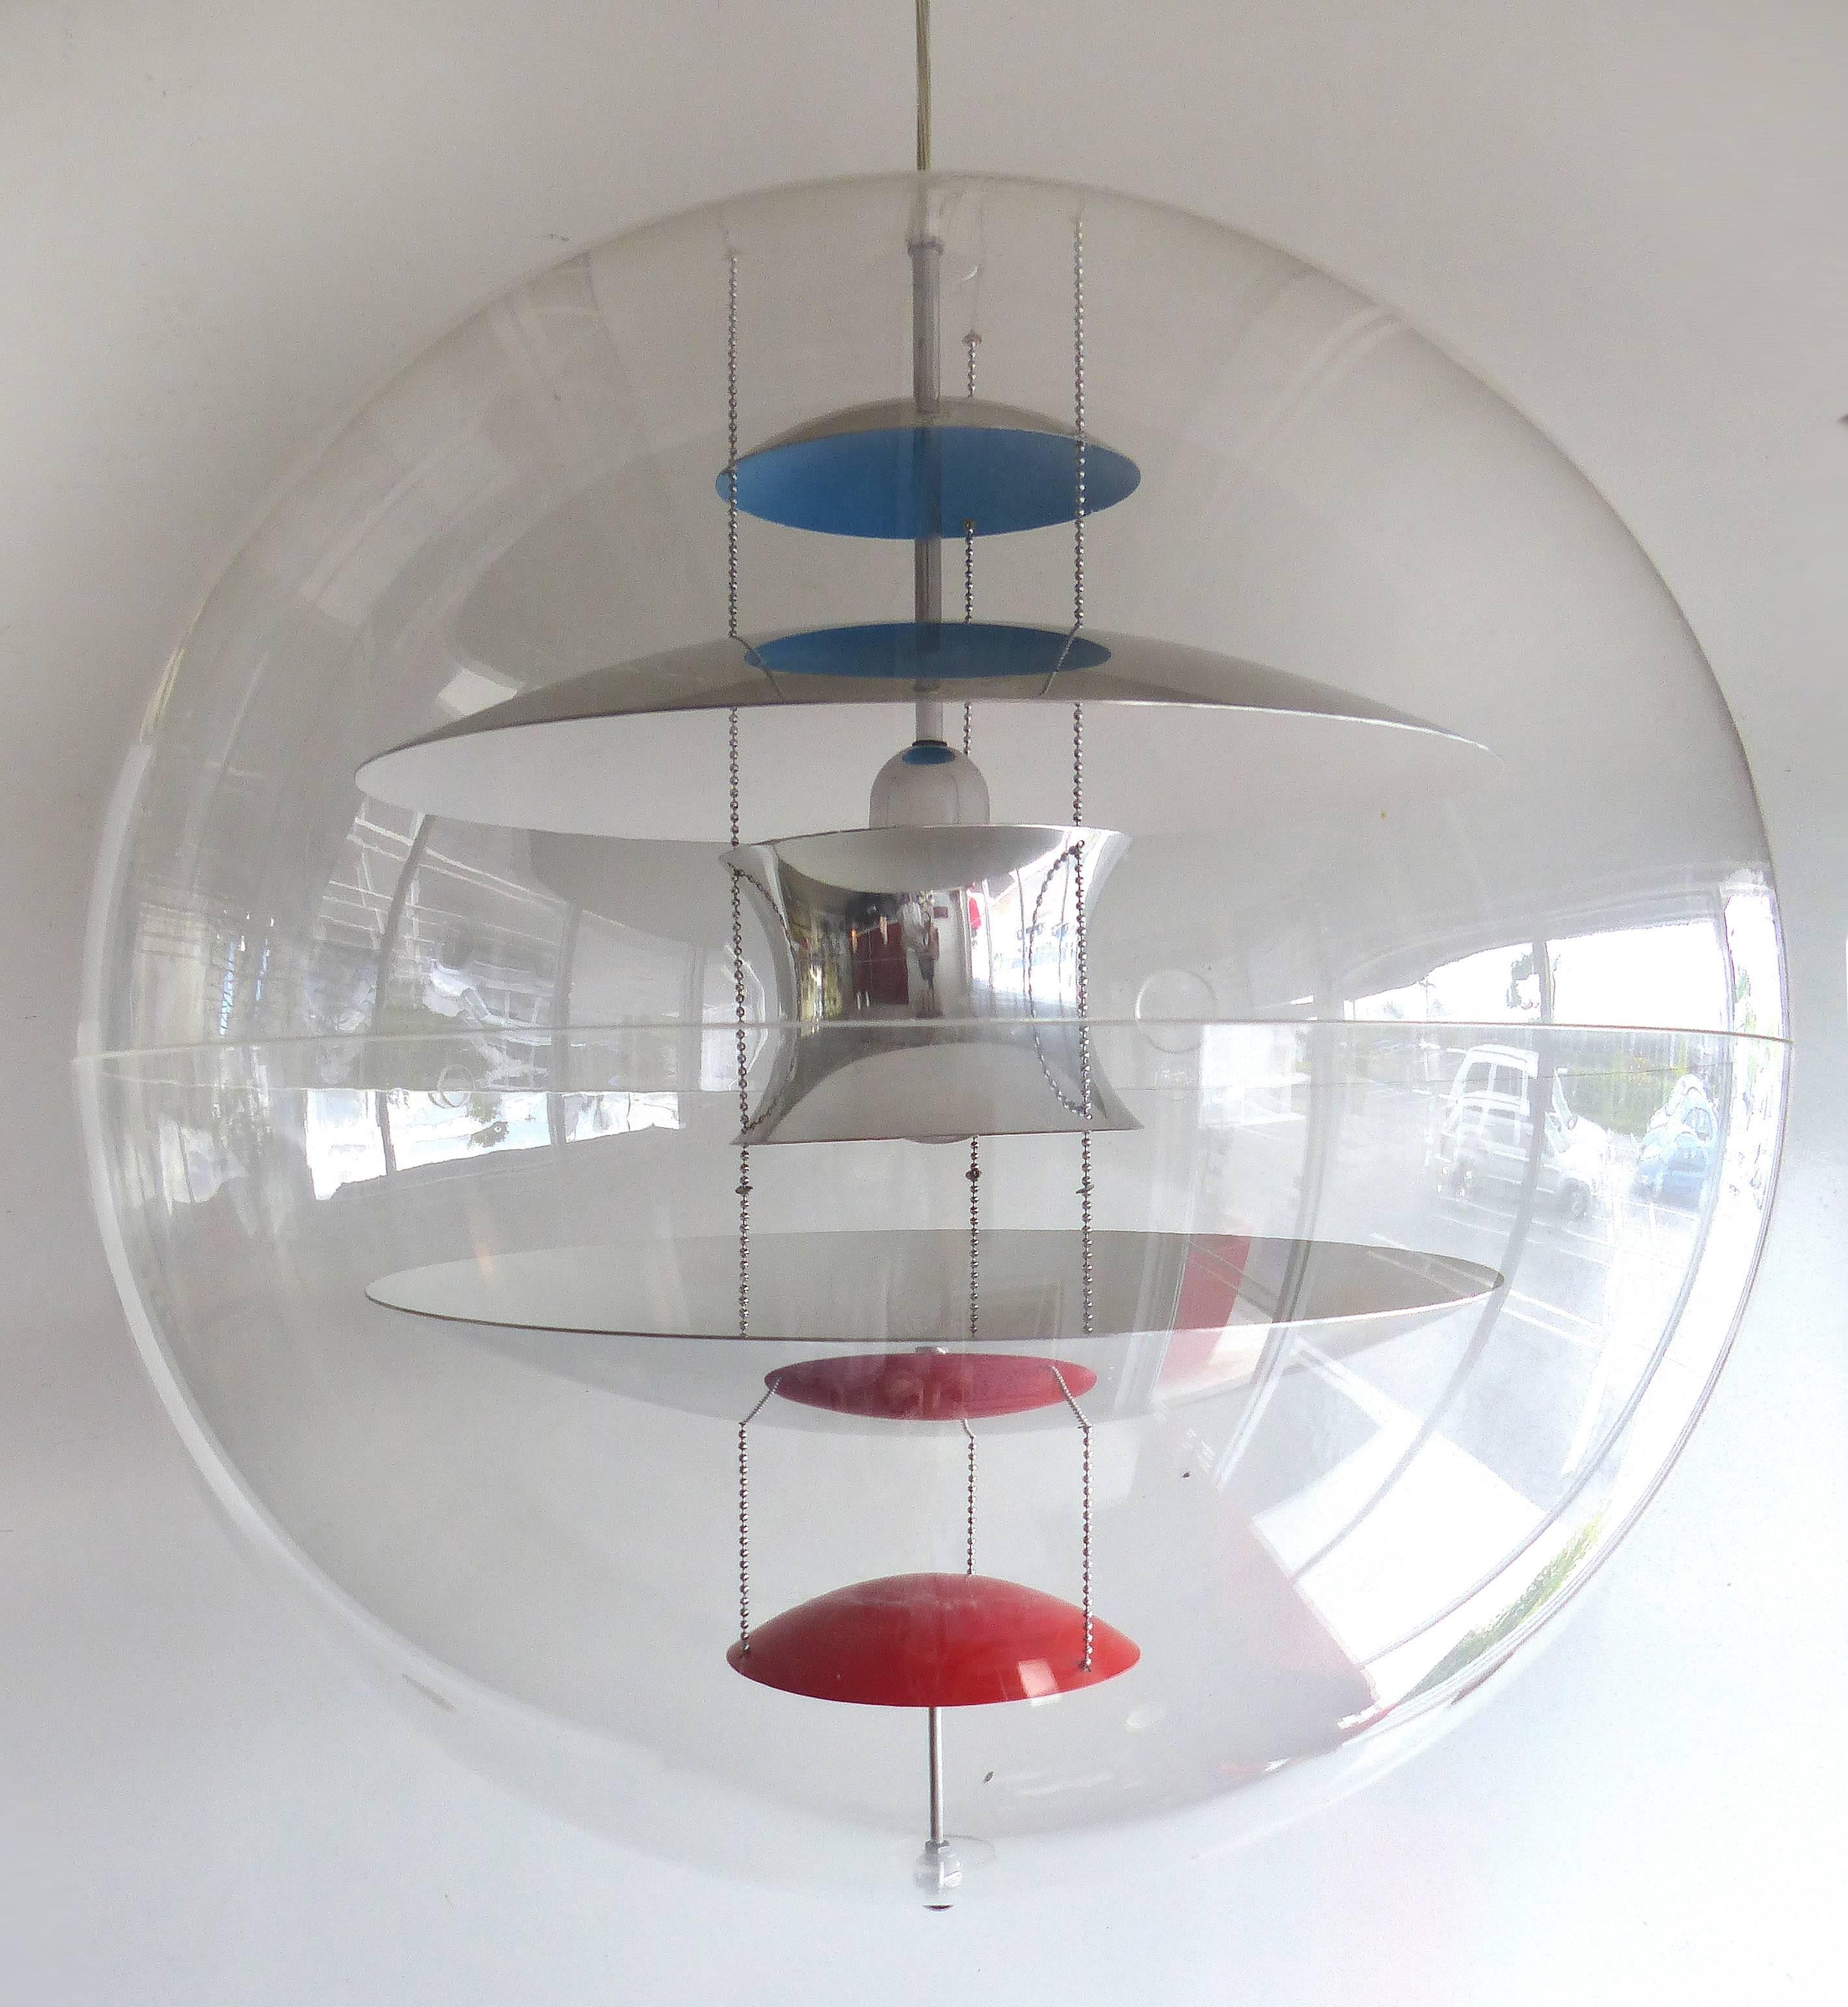 The VP globe light was designed by Verner Panton in 1960s for Louis Poulsen in Denmark. This suspension mounted incandescent light is composed of five reflectors in aluminum screens with a lacquered colored finishes. These reflectors are encased